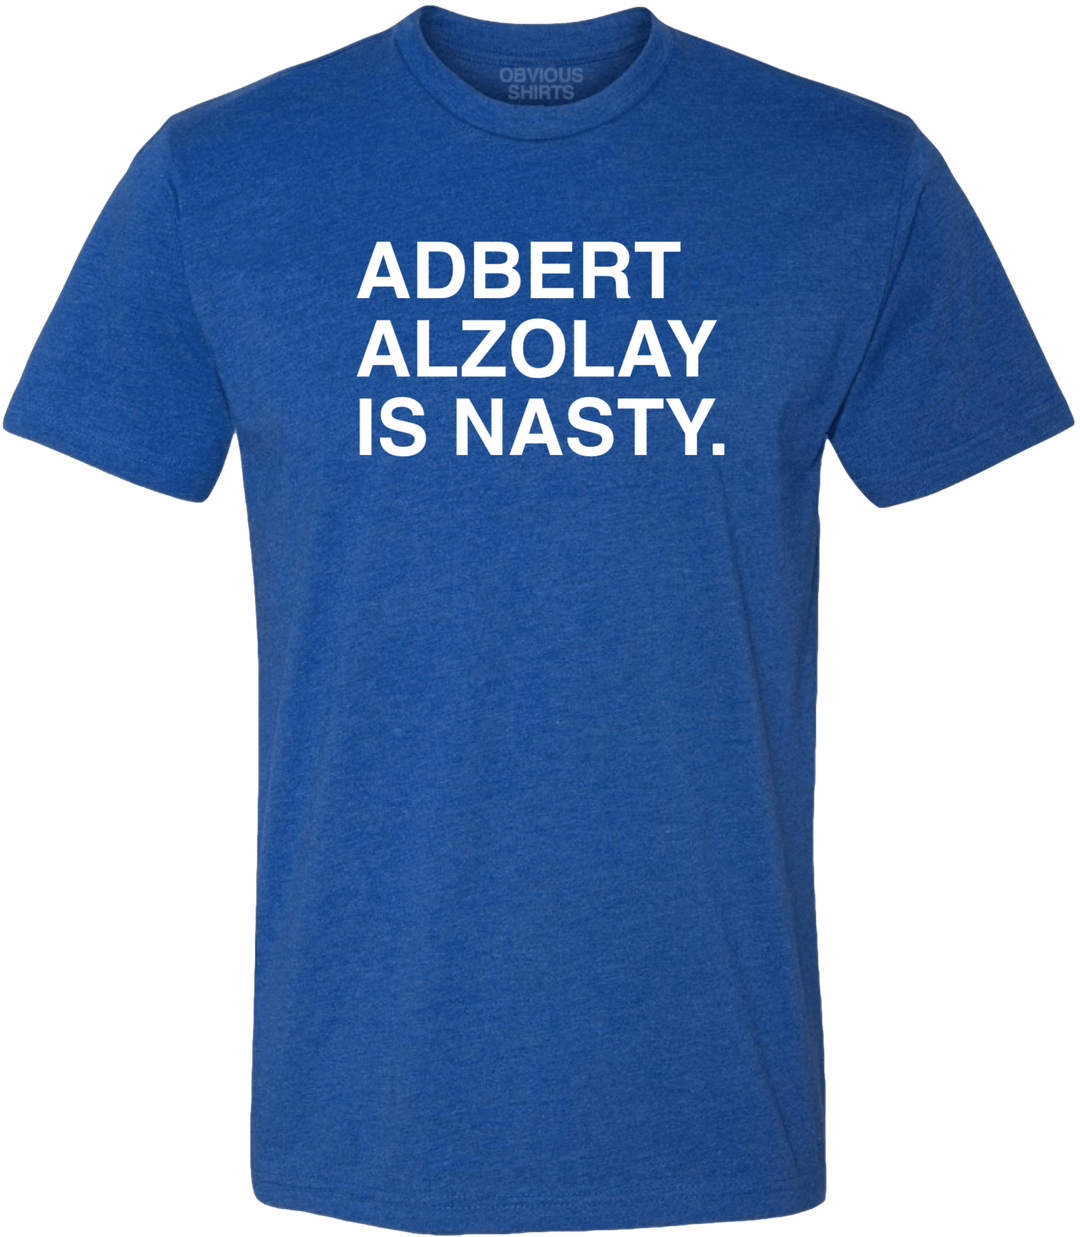 ADBERT ALZOLAY IS NASTY. - OBVIOUS SHIRTS